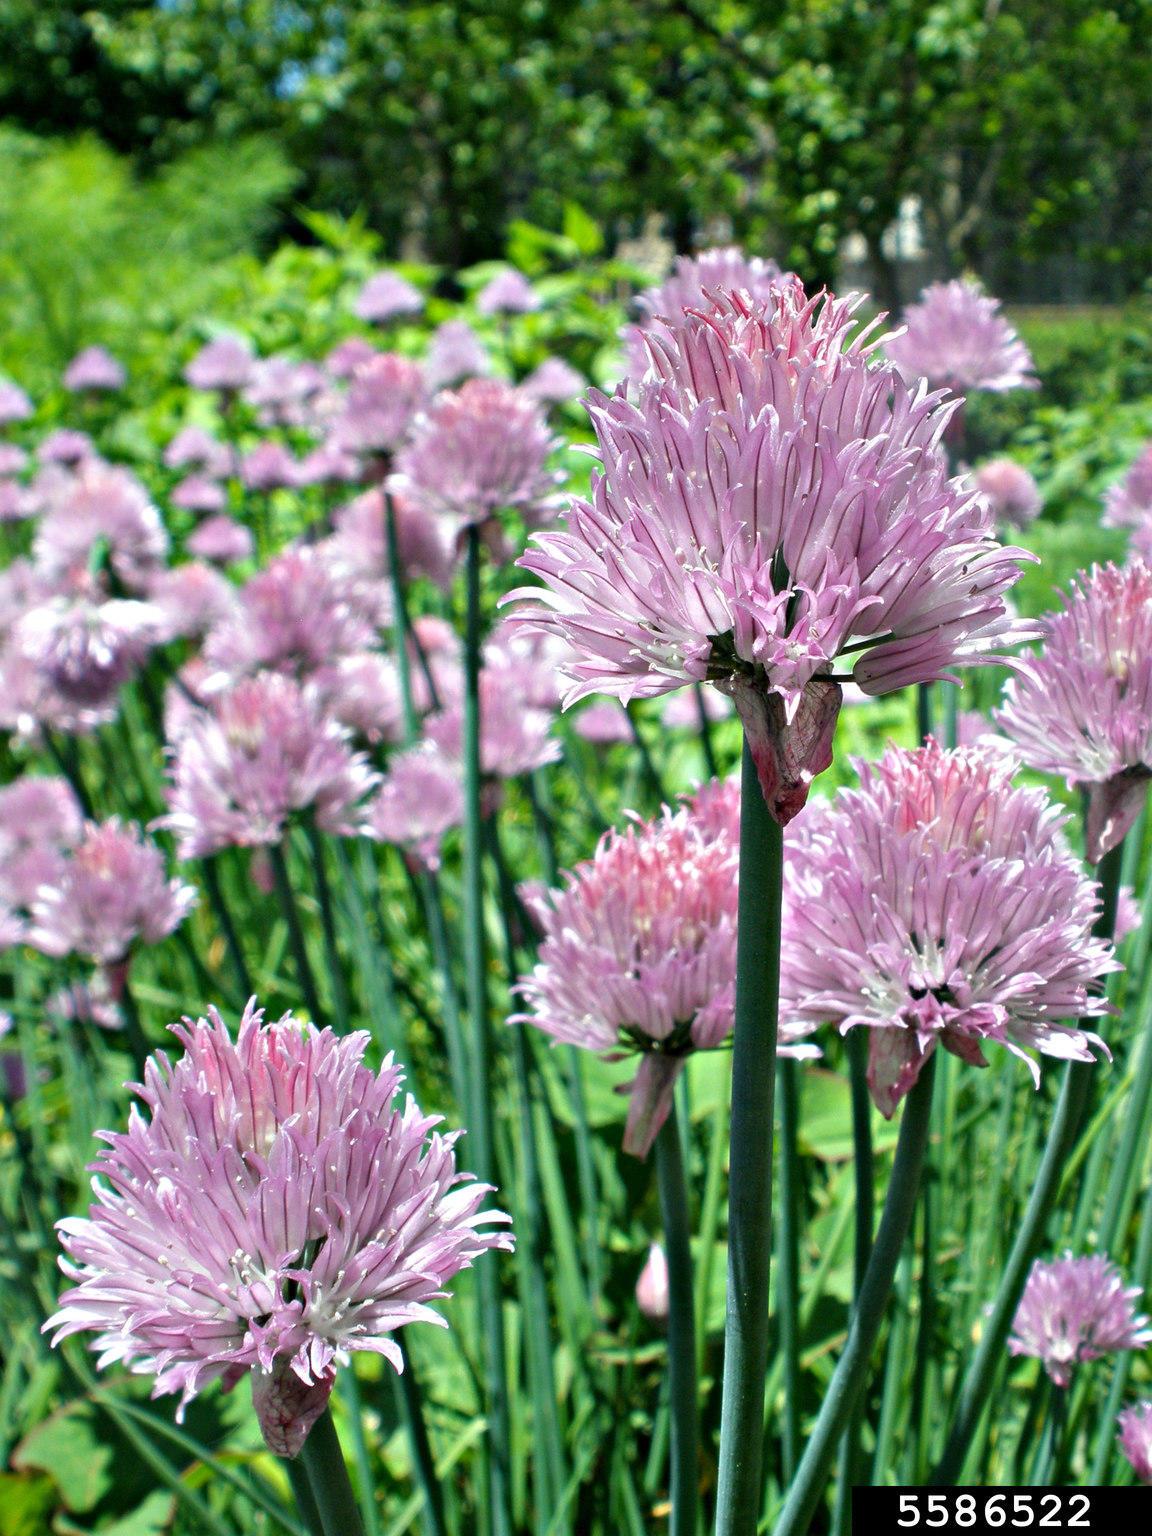 A close-up of chive plants with purple flowers.